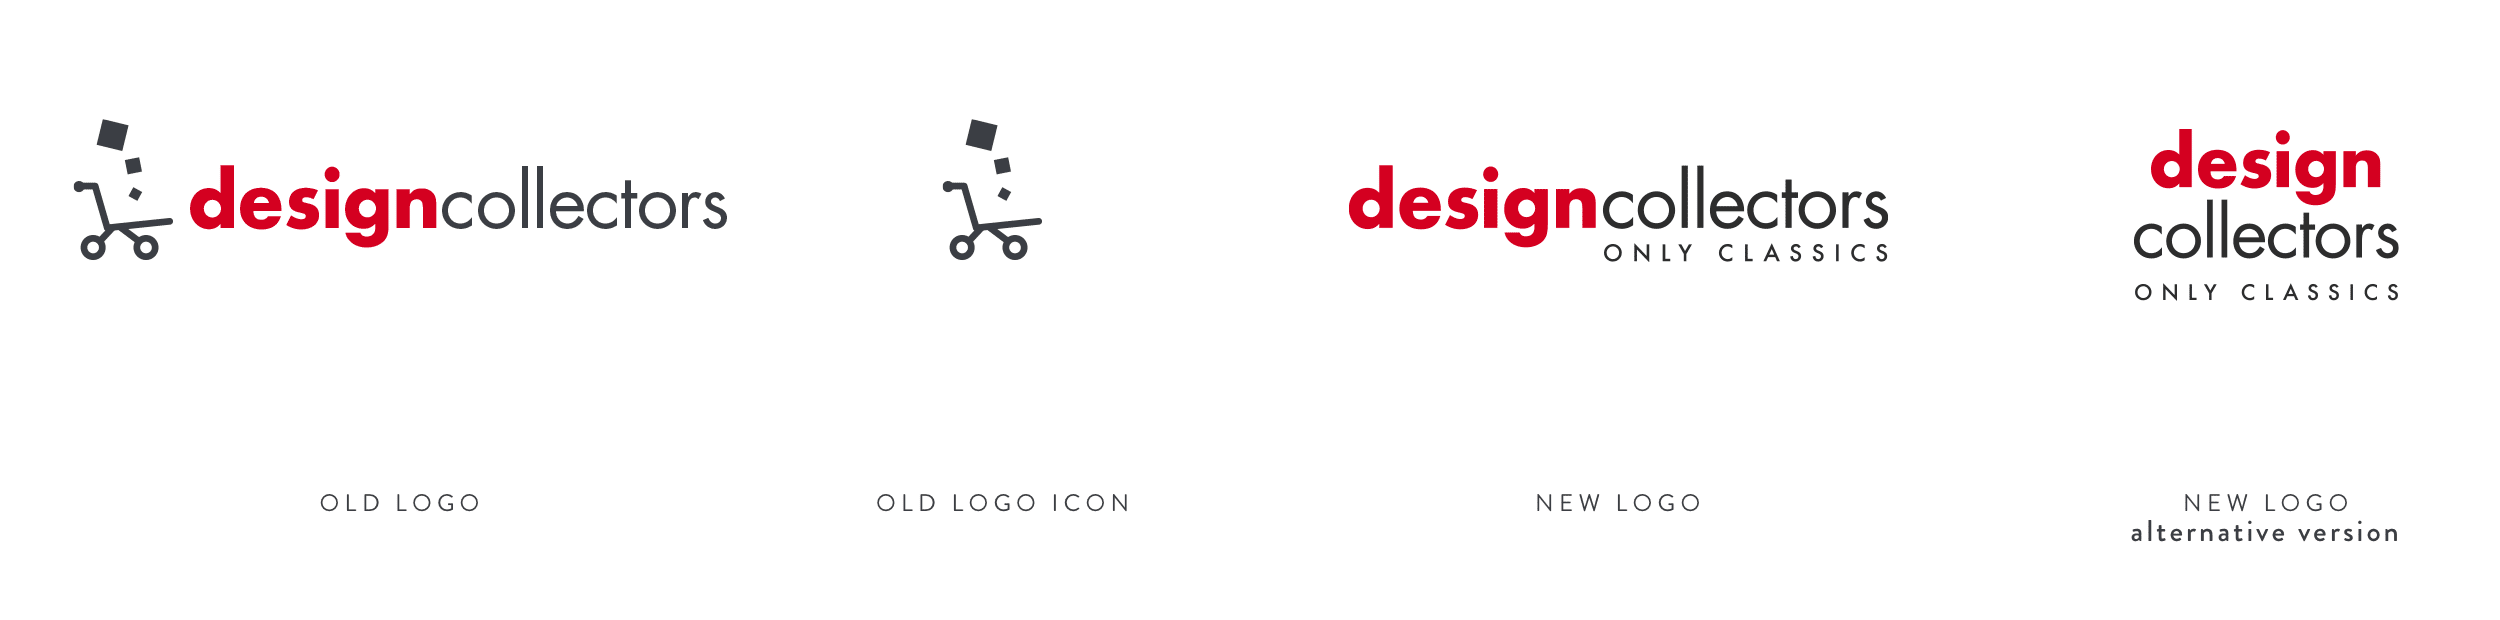 Designcollectors old and new logo design